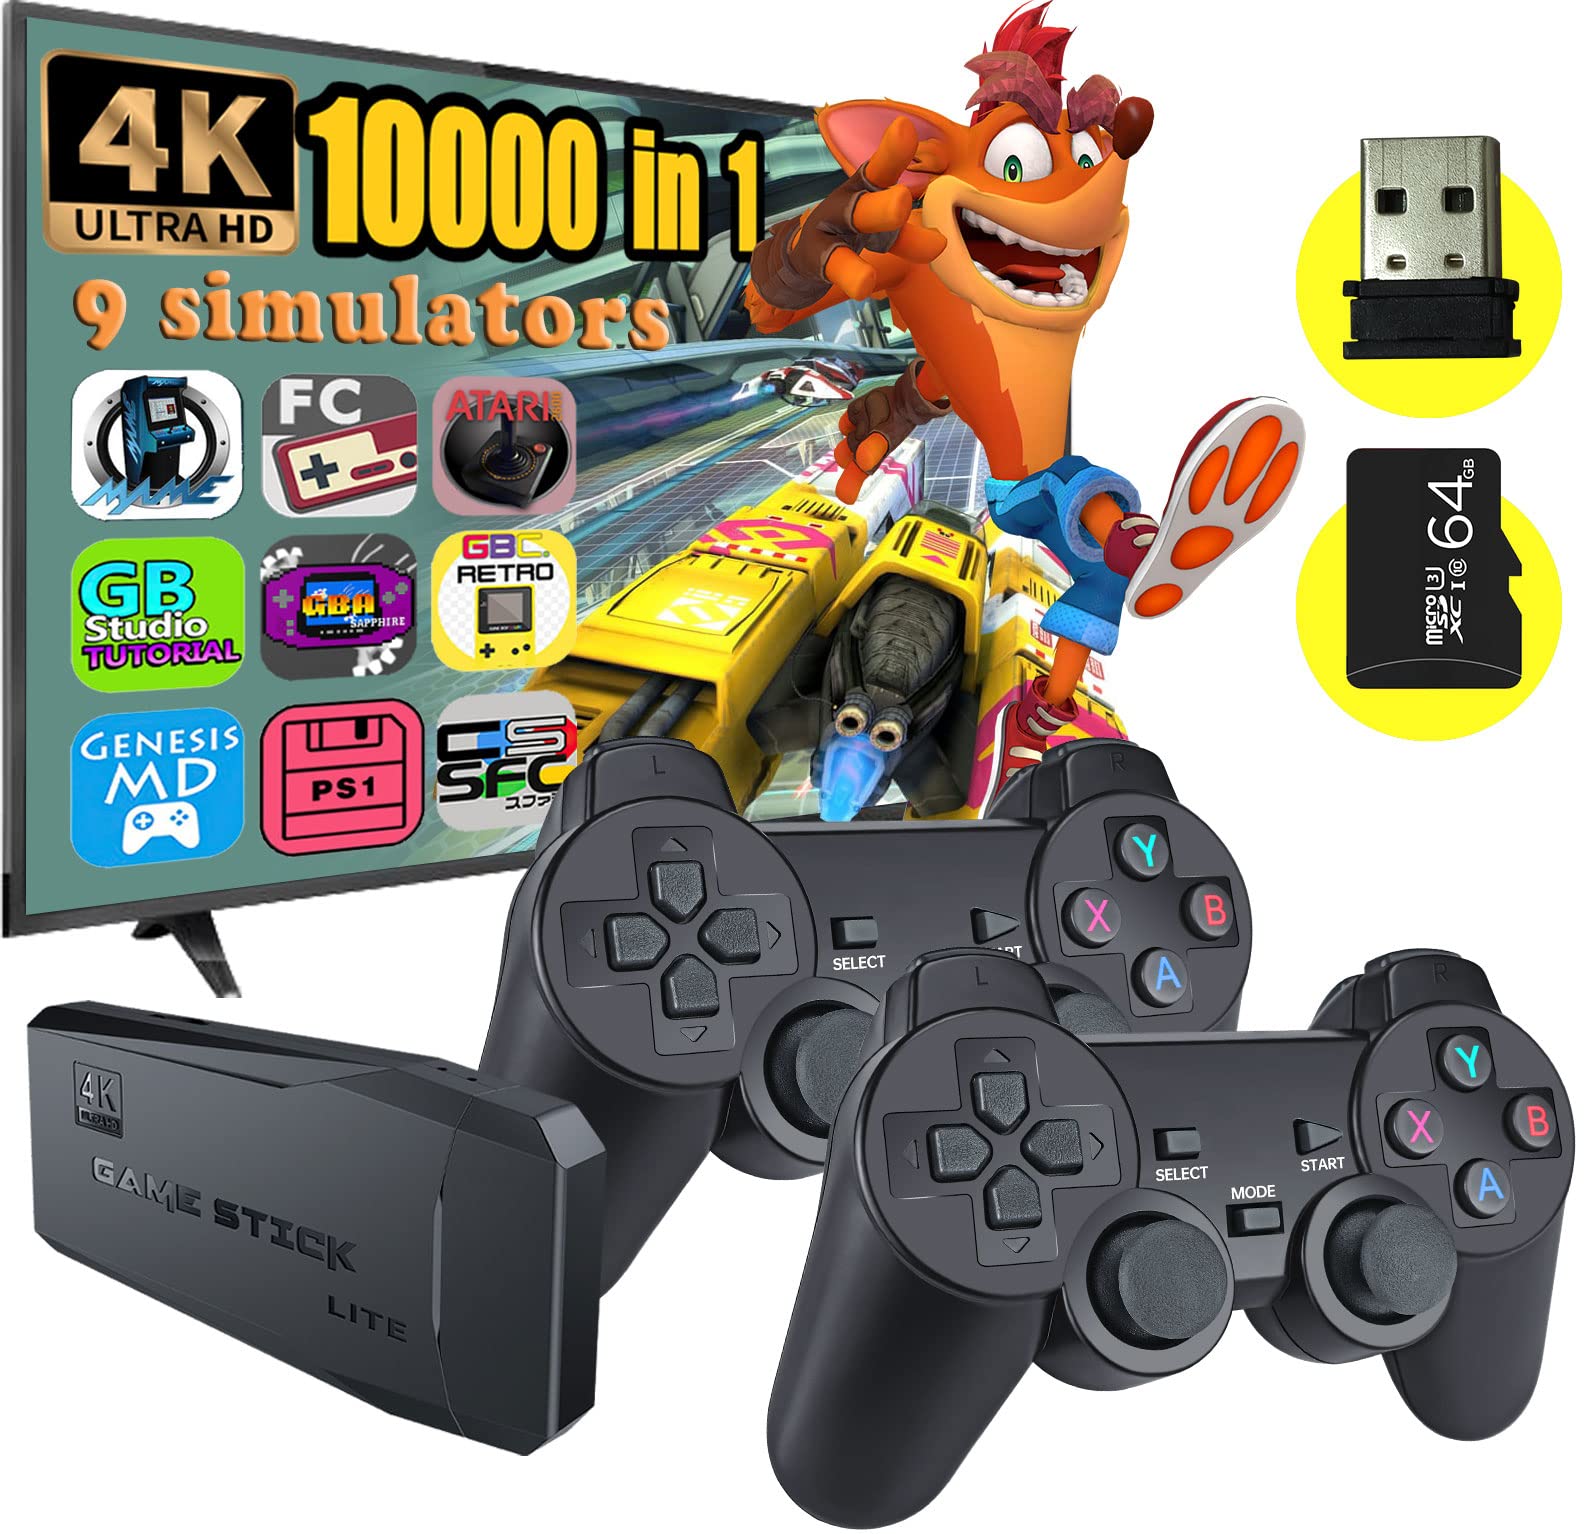 Fadist Retro Game Console, 4K HDMI HD Output Video Game Player, Built in 10000+ Classic Games, with 2 Ergonomics Controllers, Plug and Play Mini Game Box, Ideal Gift for Kids, Adult, Friend, Lover